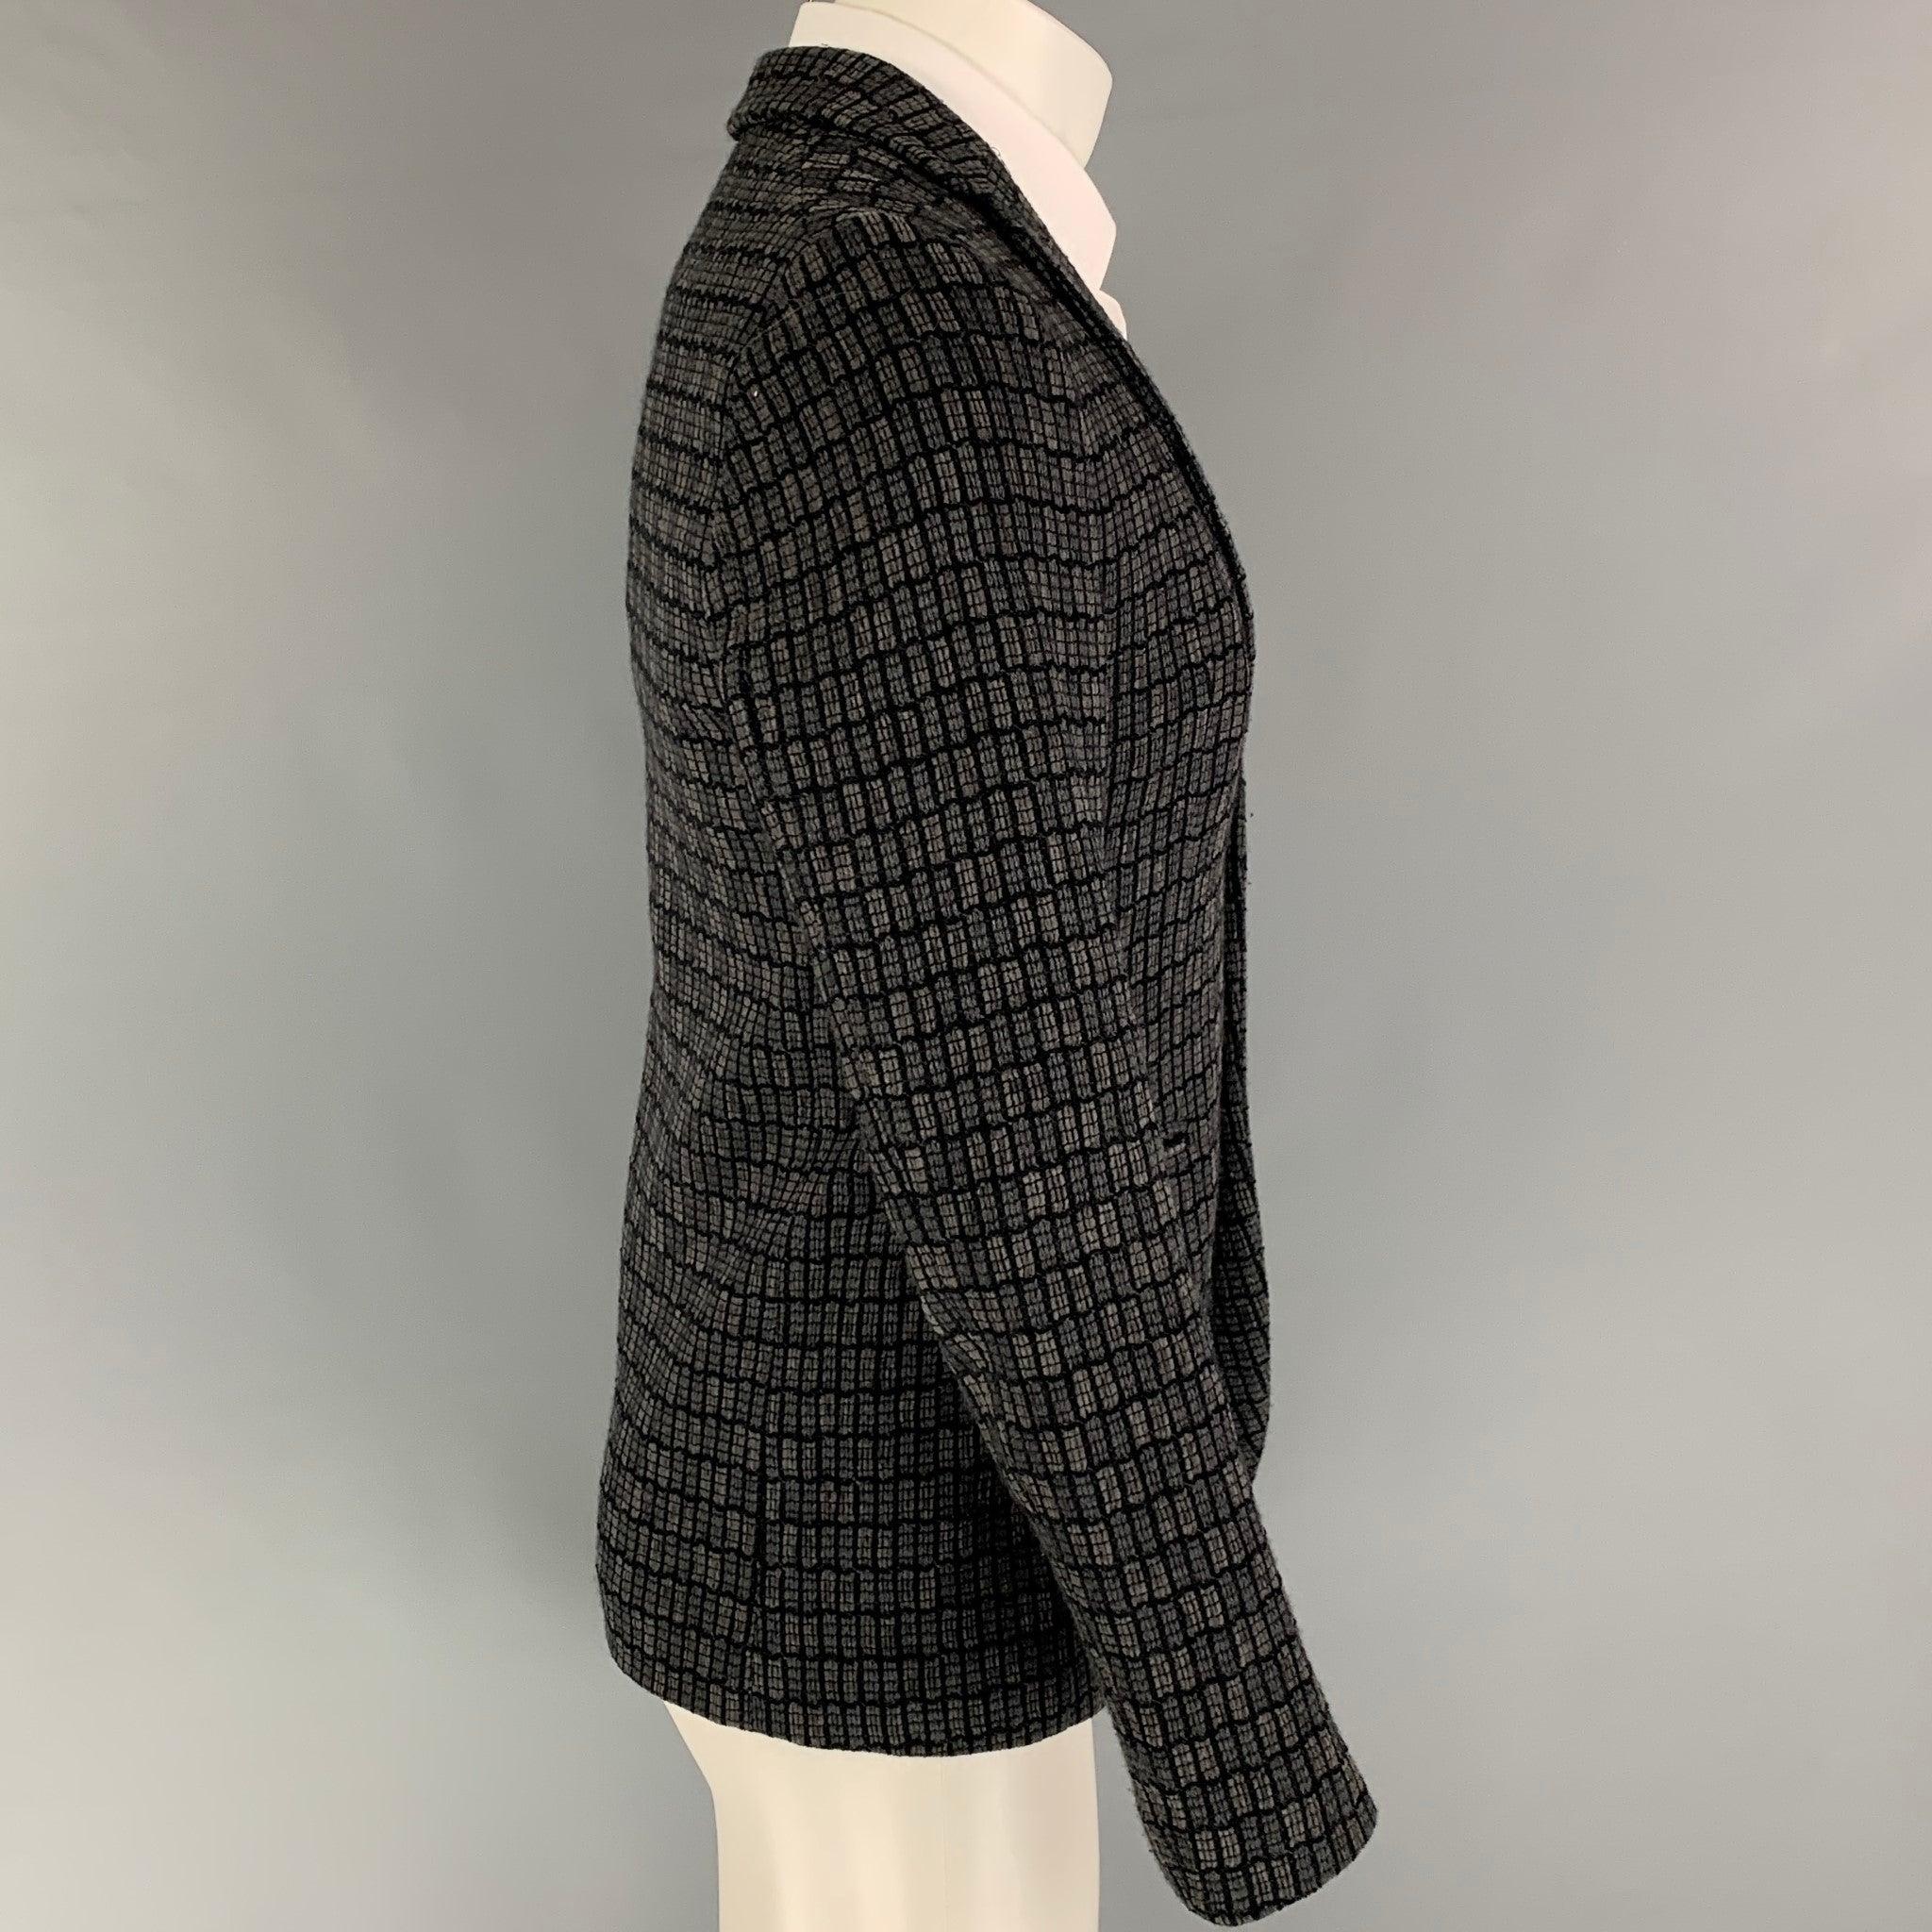 EMPORIO ARMANI sport coat comes in a grey & black knitted wool blend with a full liner featuring a notch lapel, slit pockets, and a double button closure. Made in Italy.
Very Good
Pre-Owned Condition.  

Marked:   44 

Measurements: 
 
Shoulder: 17